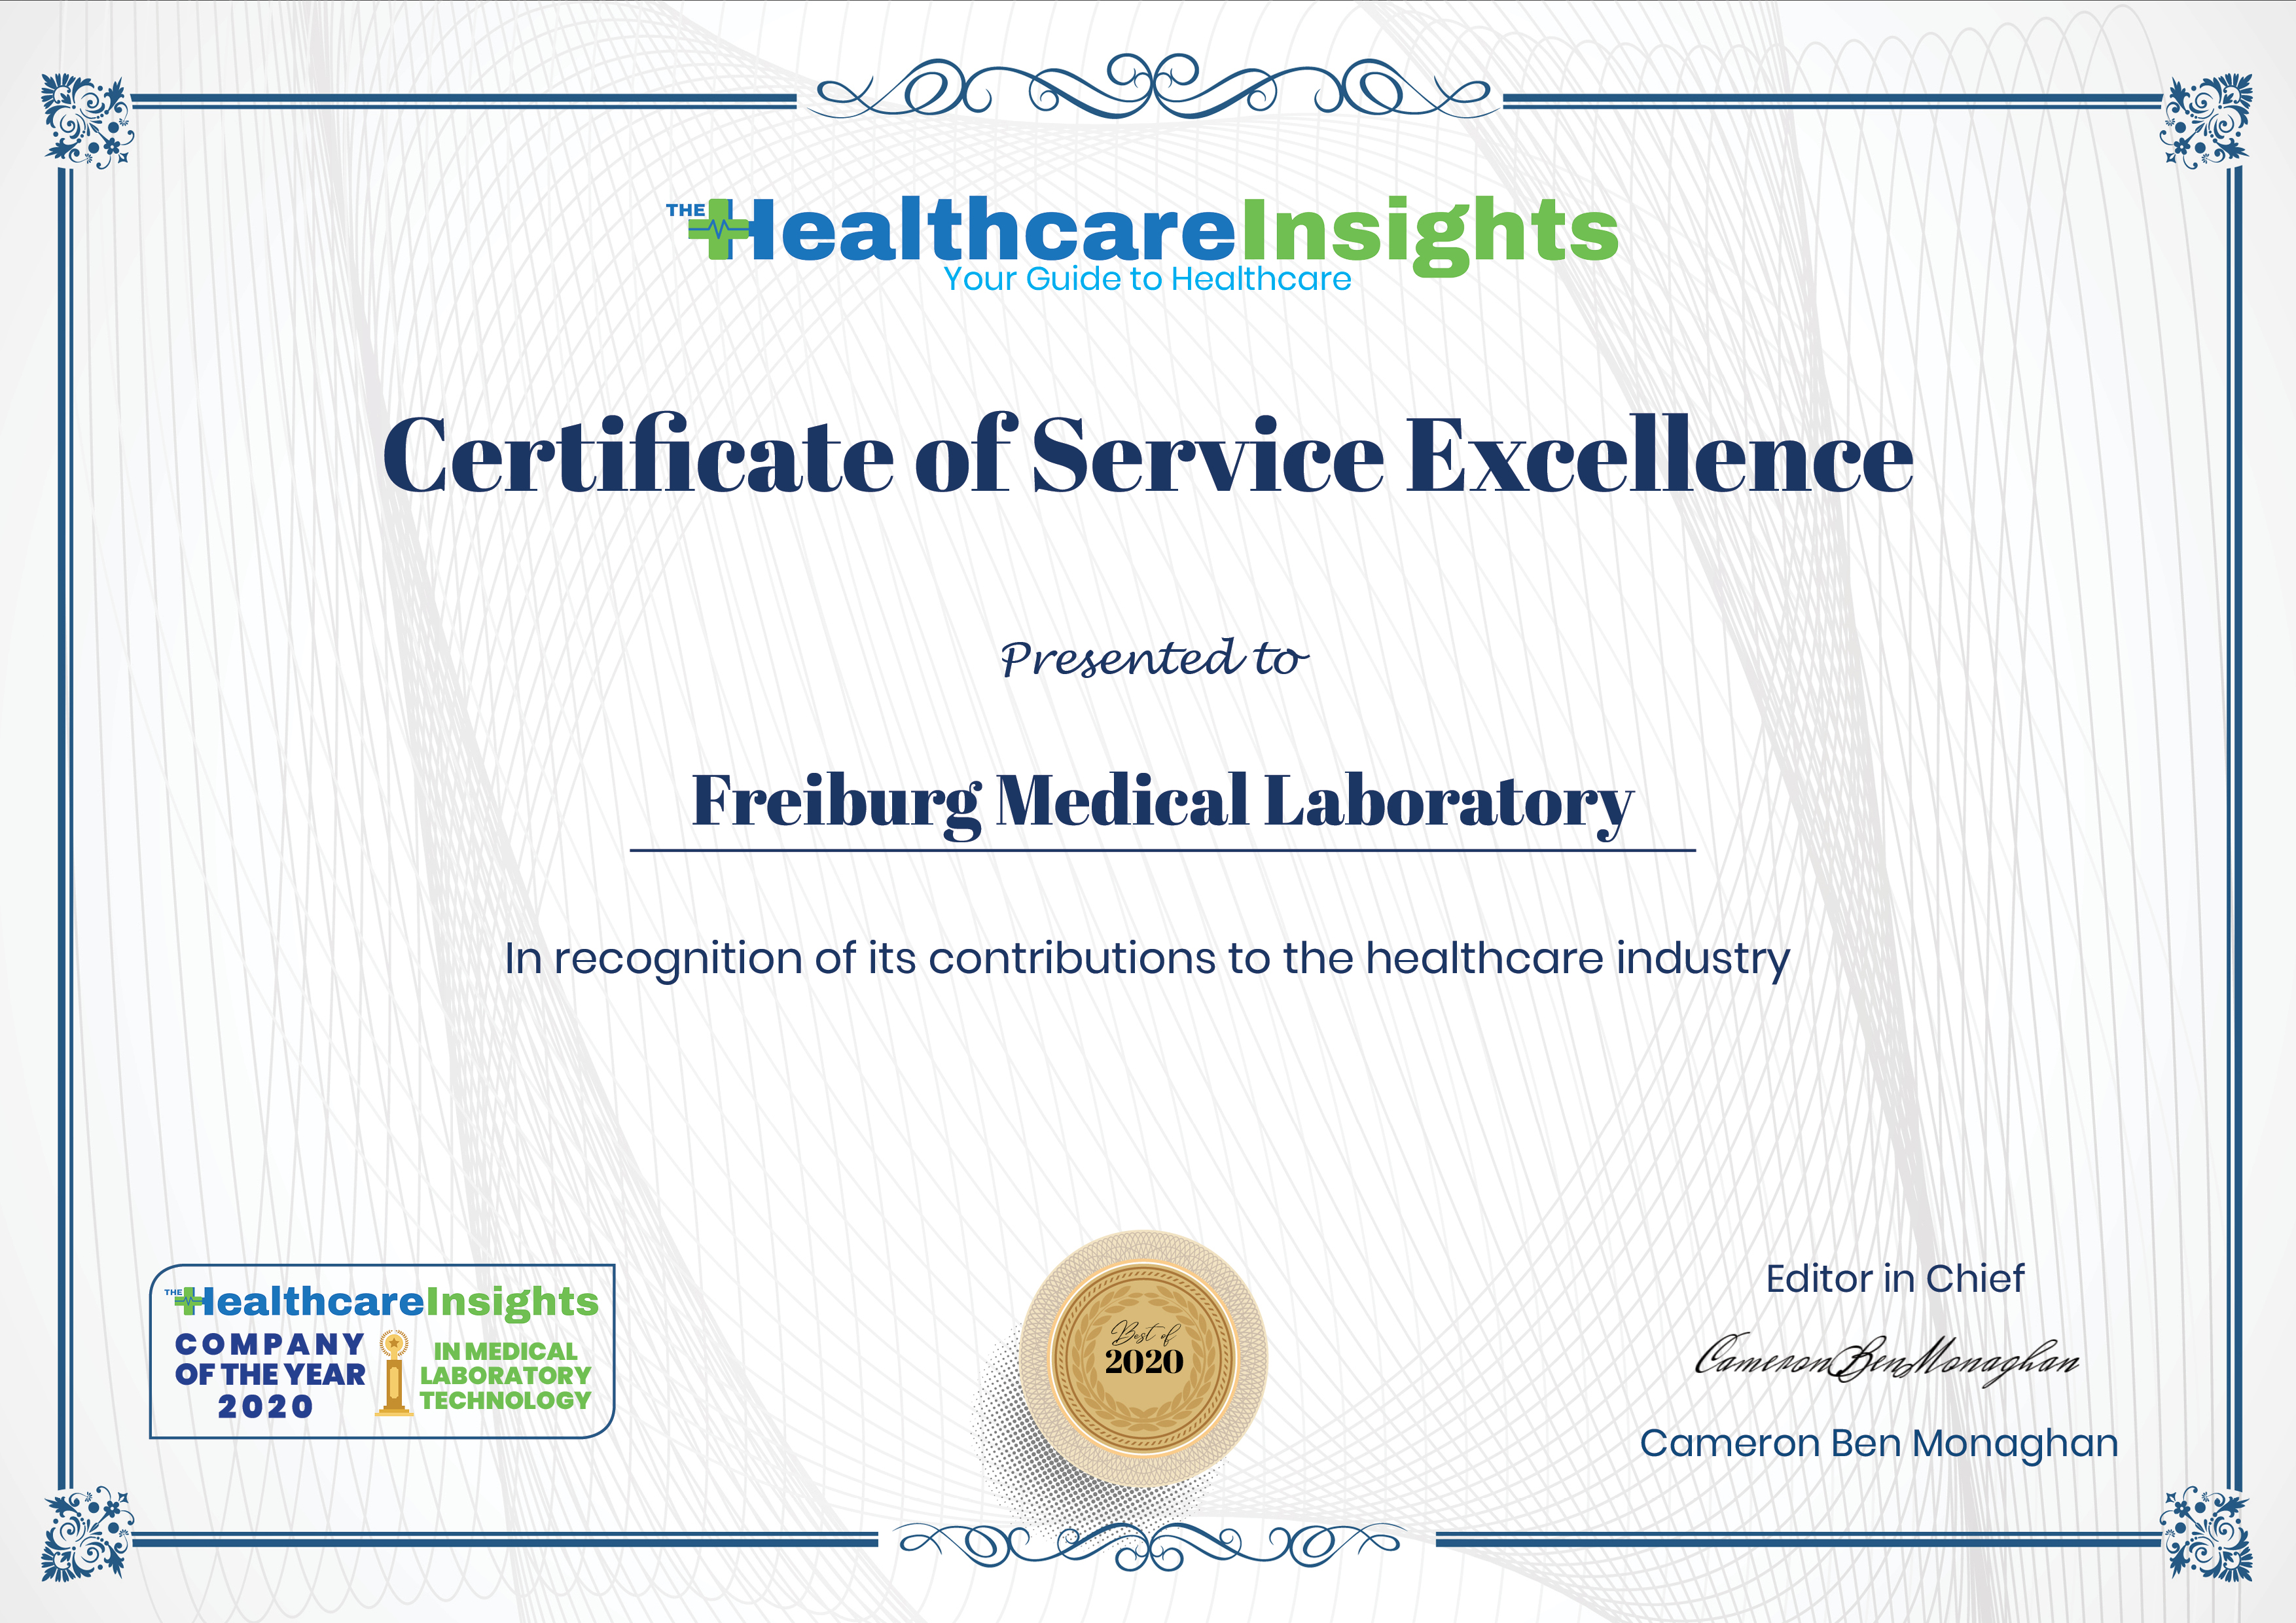 Healthcare Insight company of the year 2020